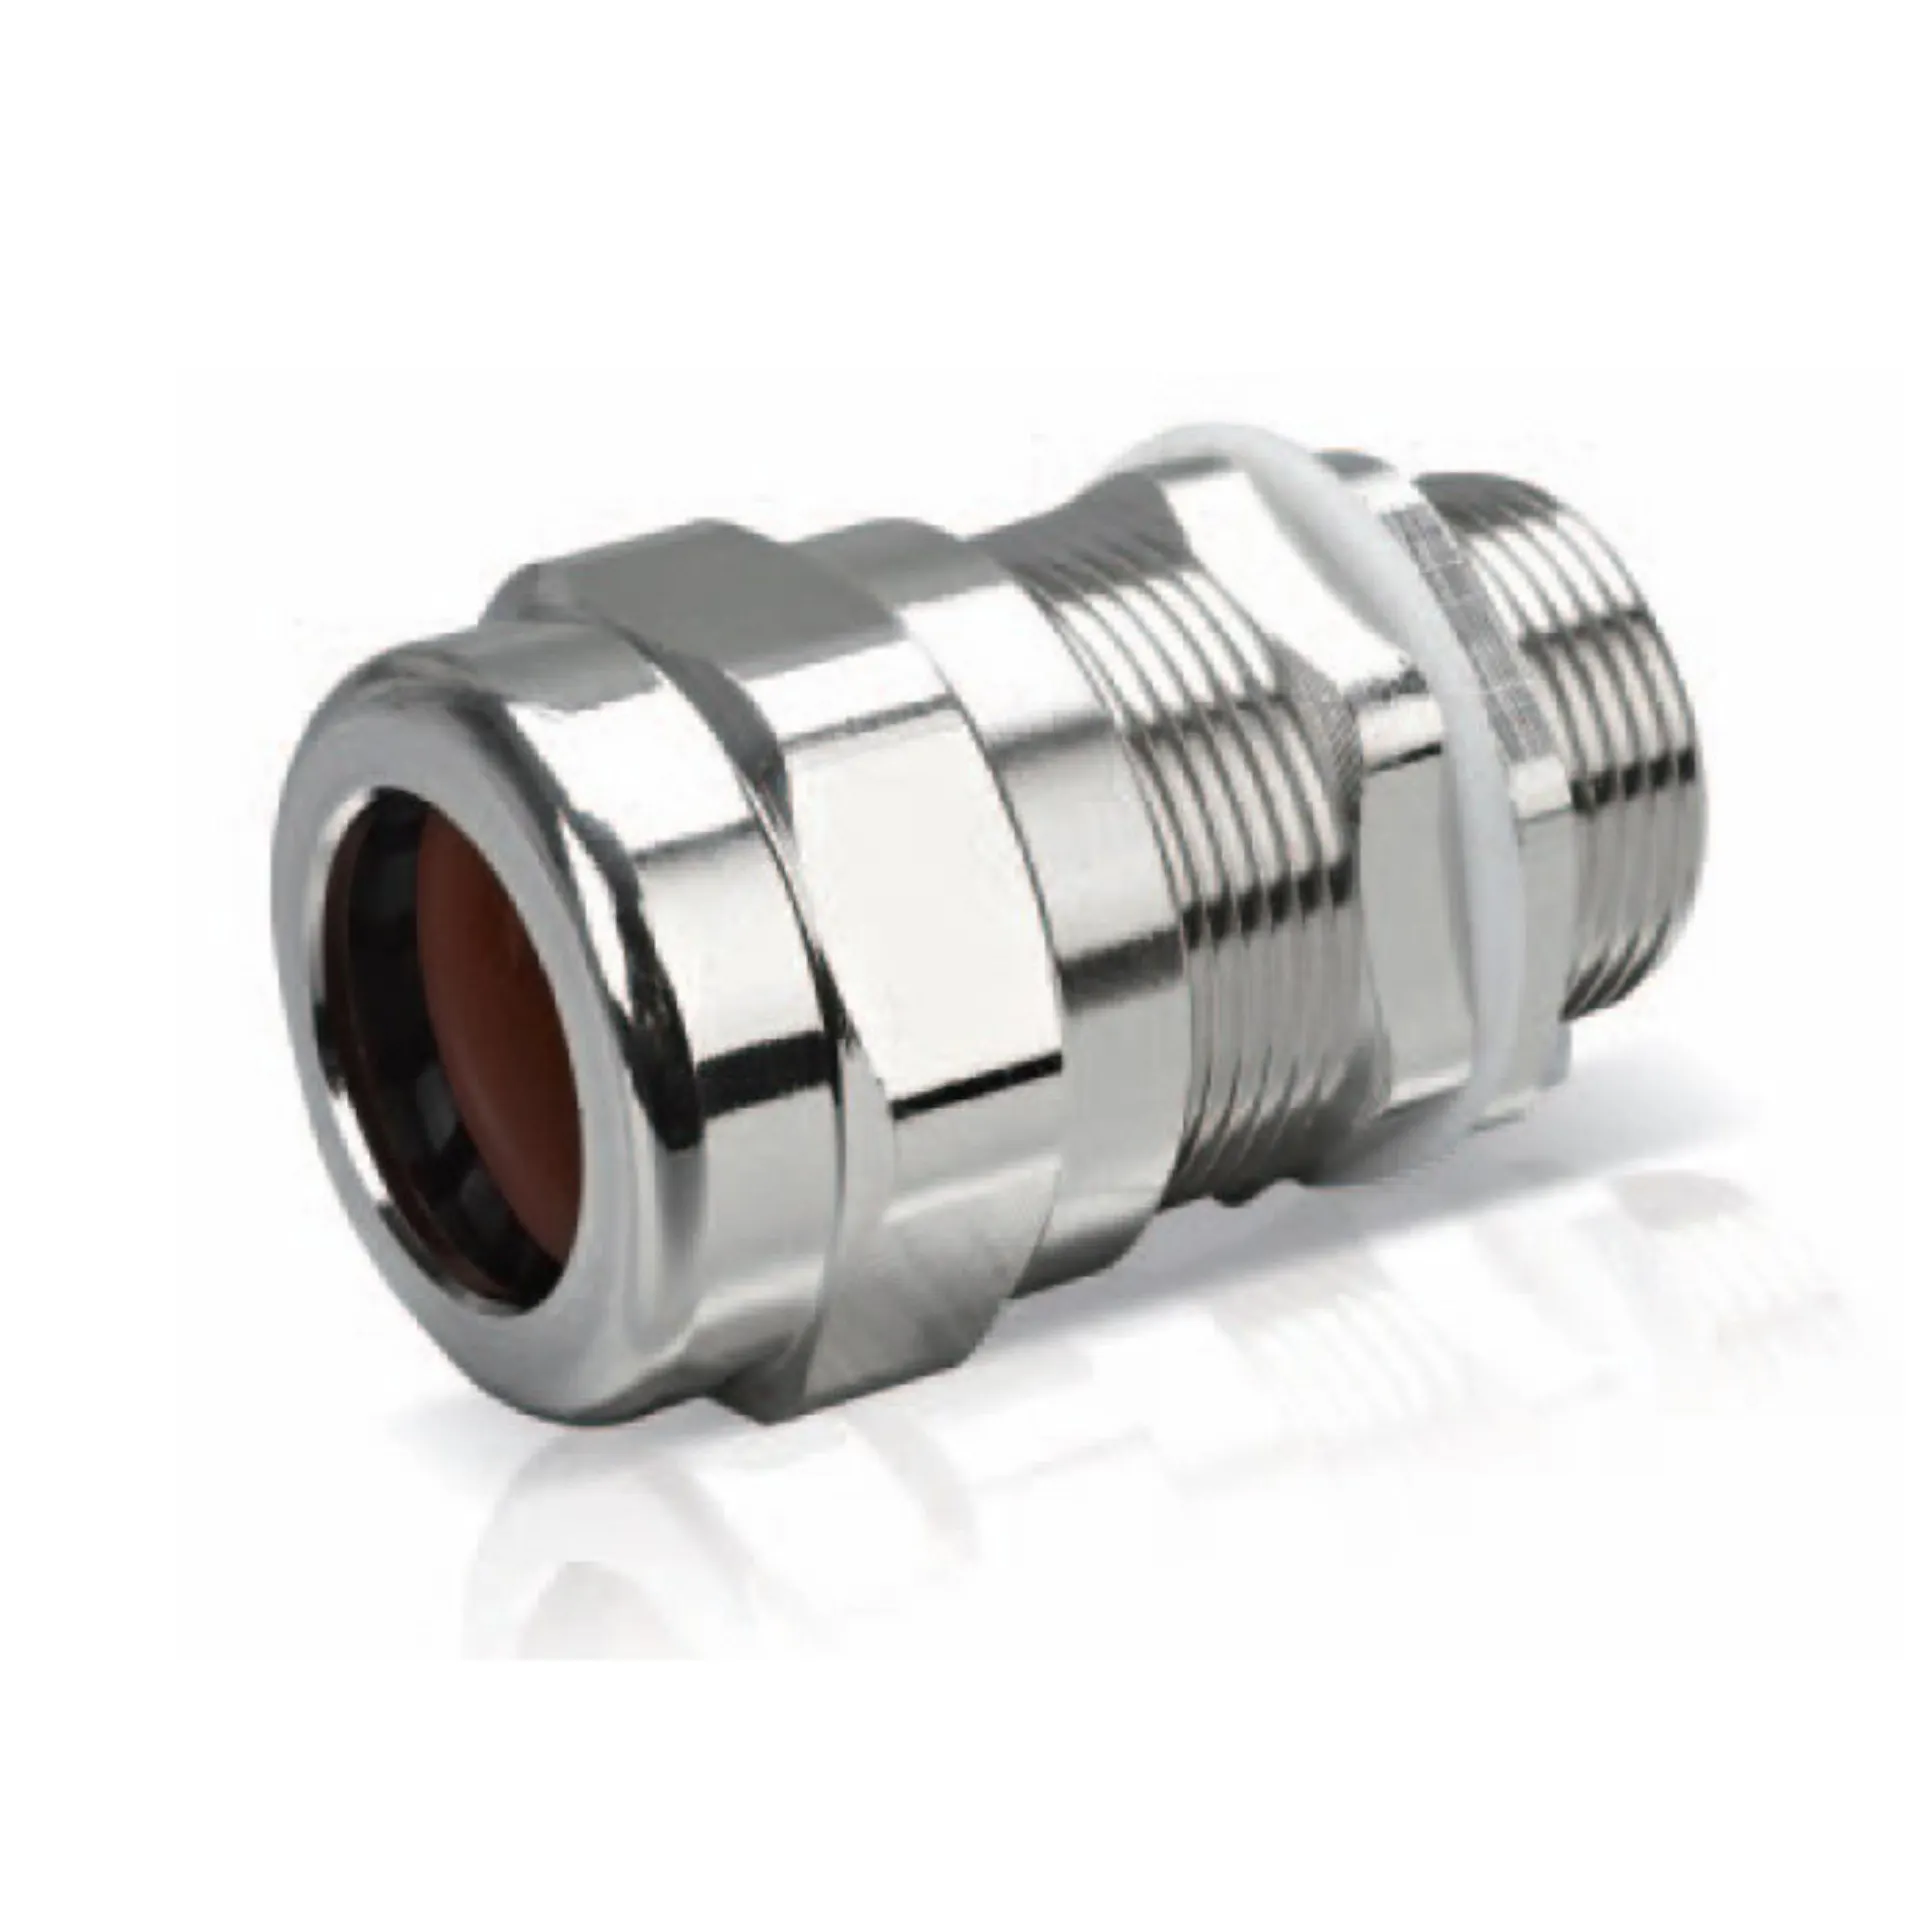 Electrical Metal Stainless Steel Brass Ip68 Standard Explosion Proof M8 Lengthen Cable Gland